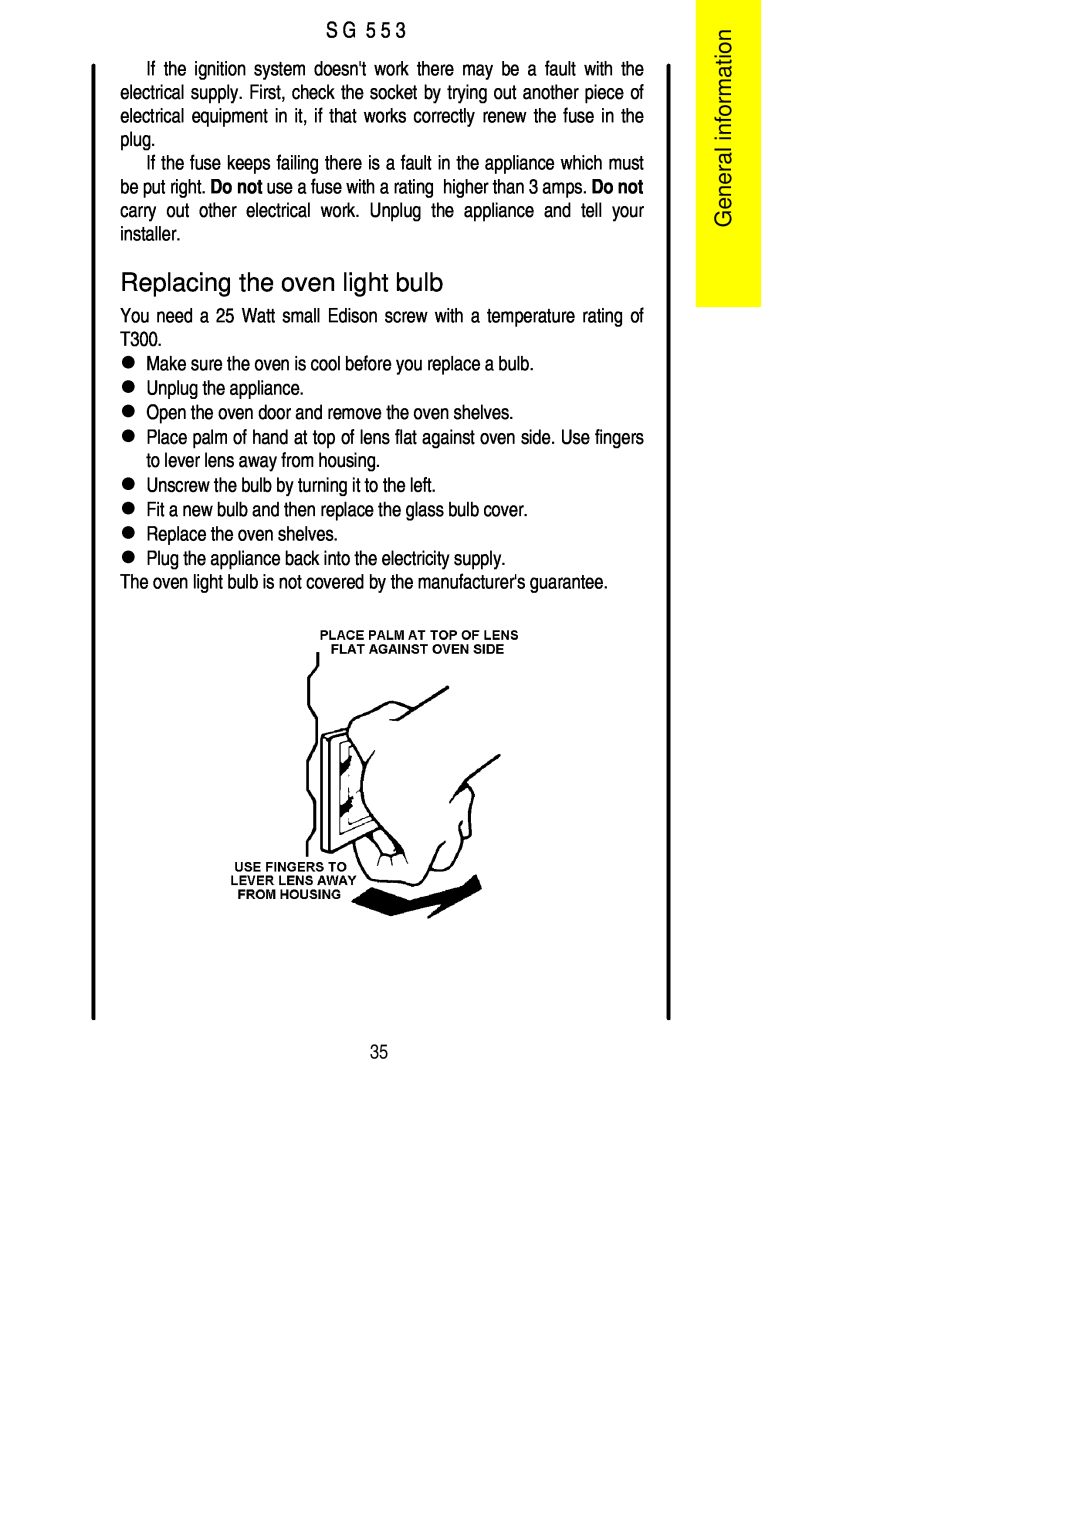 Parkinson Cowan SG 553 installation instructions Replacing the oven light bulb, General information, S G 